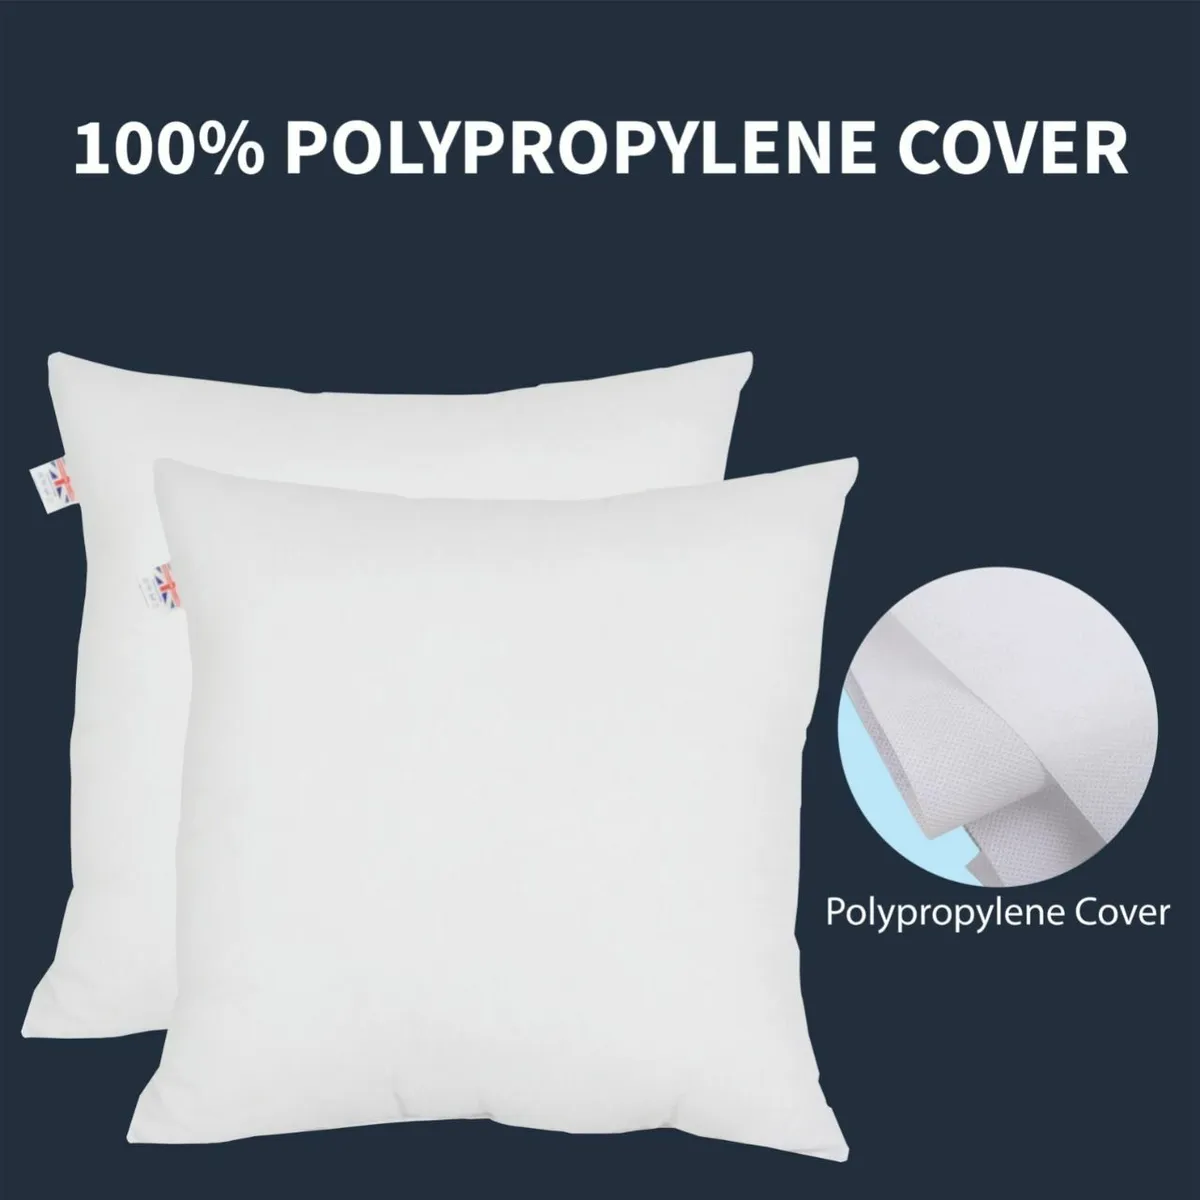 Pillow Insert 18 X 18 Inch 45cm X 45cm Polyester Fill Square White 